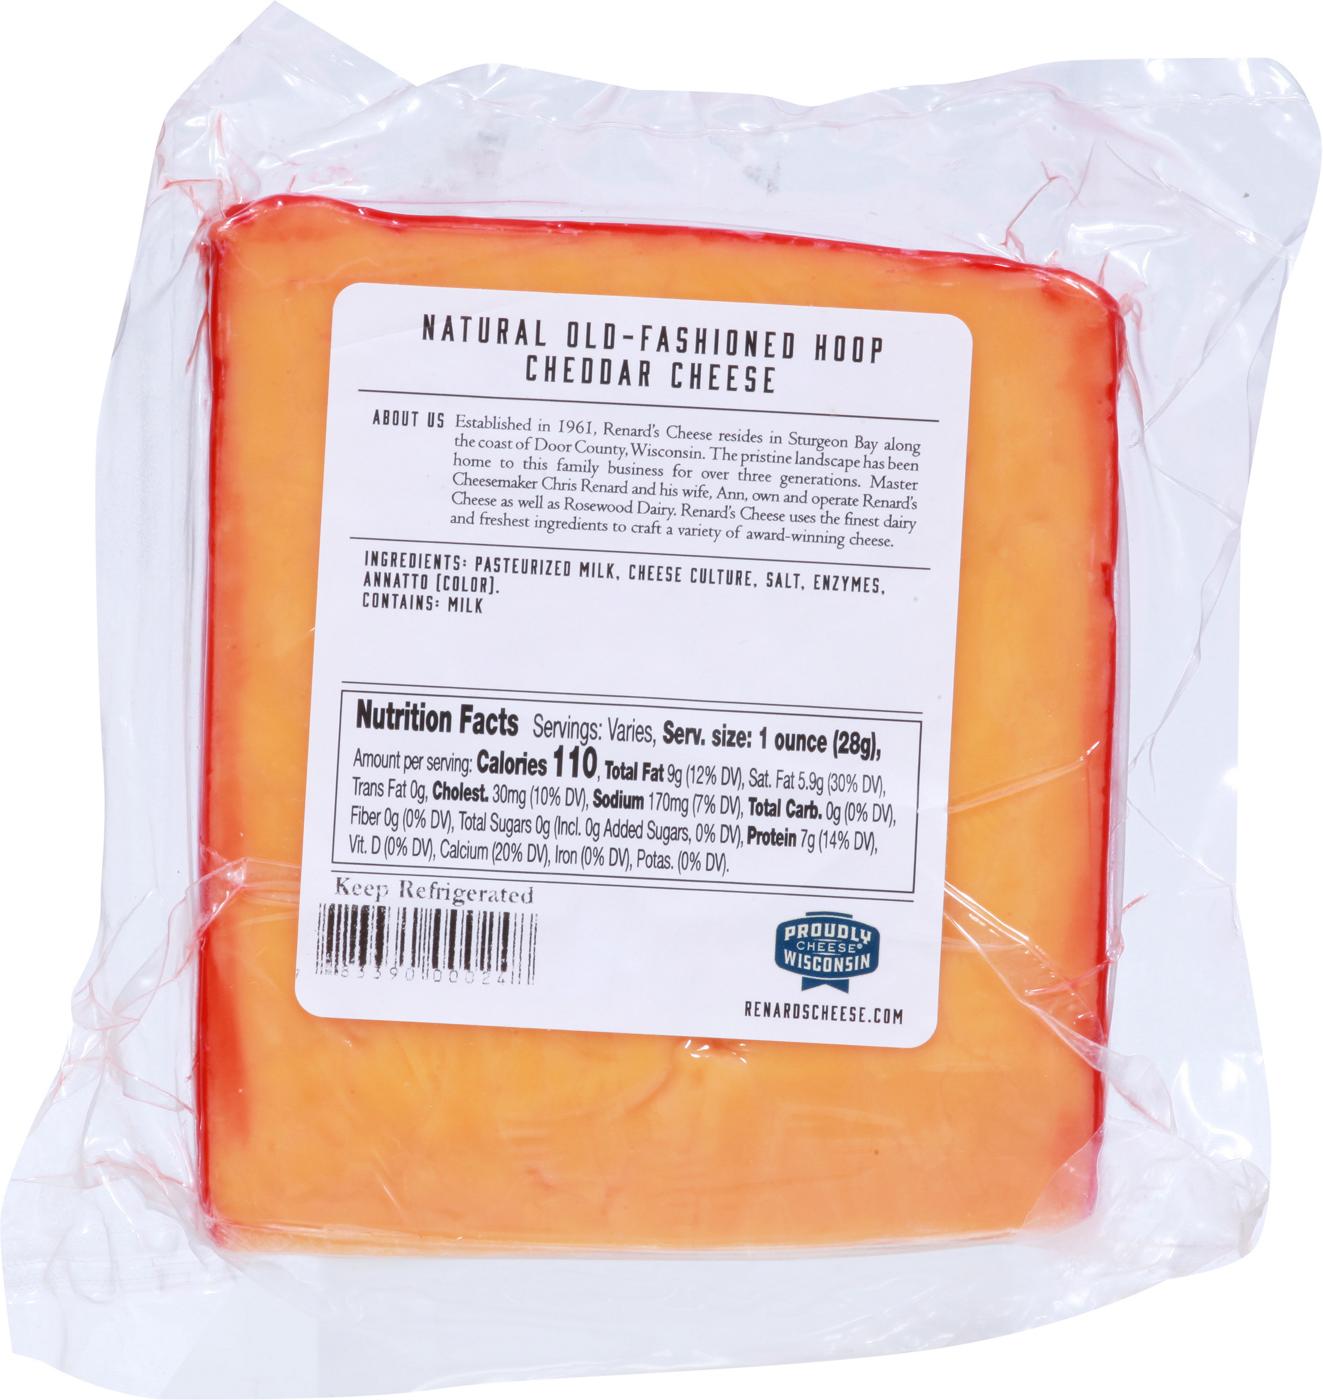 Renard's Artisan Cheese Natural Old-Fashioned Hoop Cheddar Cheese; image 3 of 3